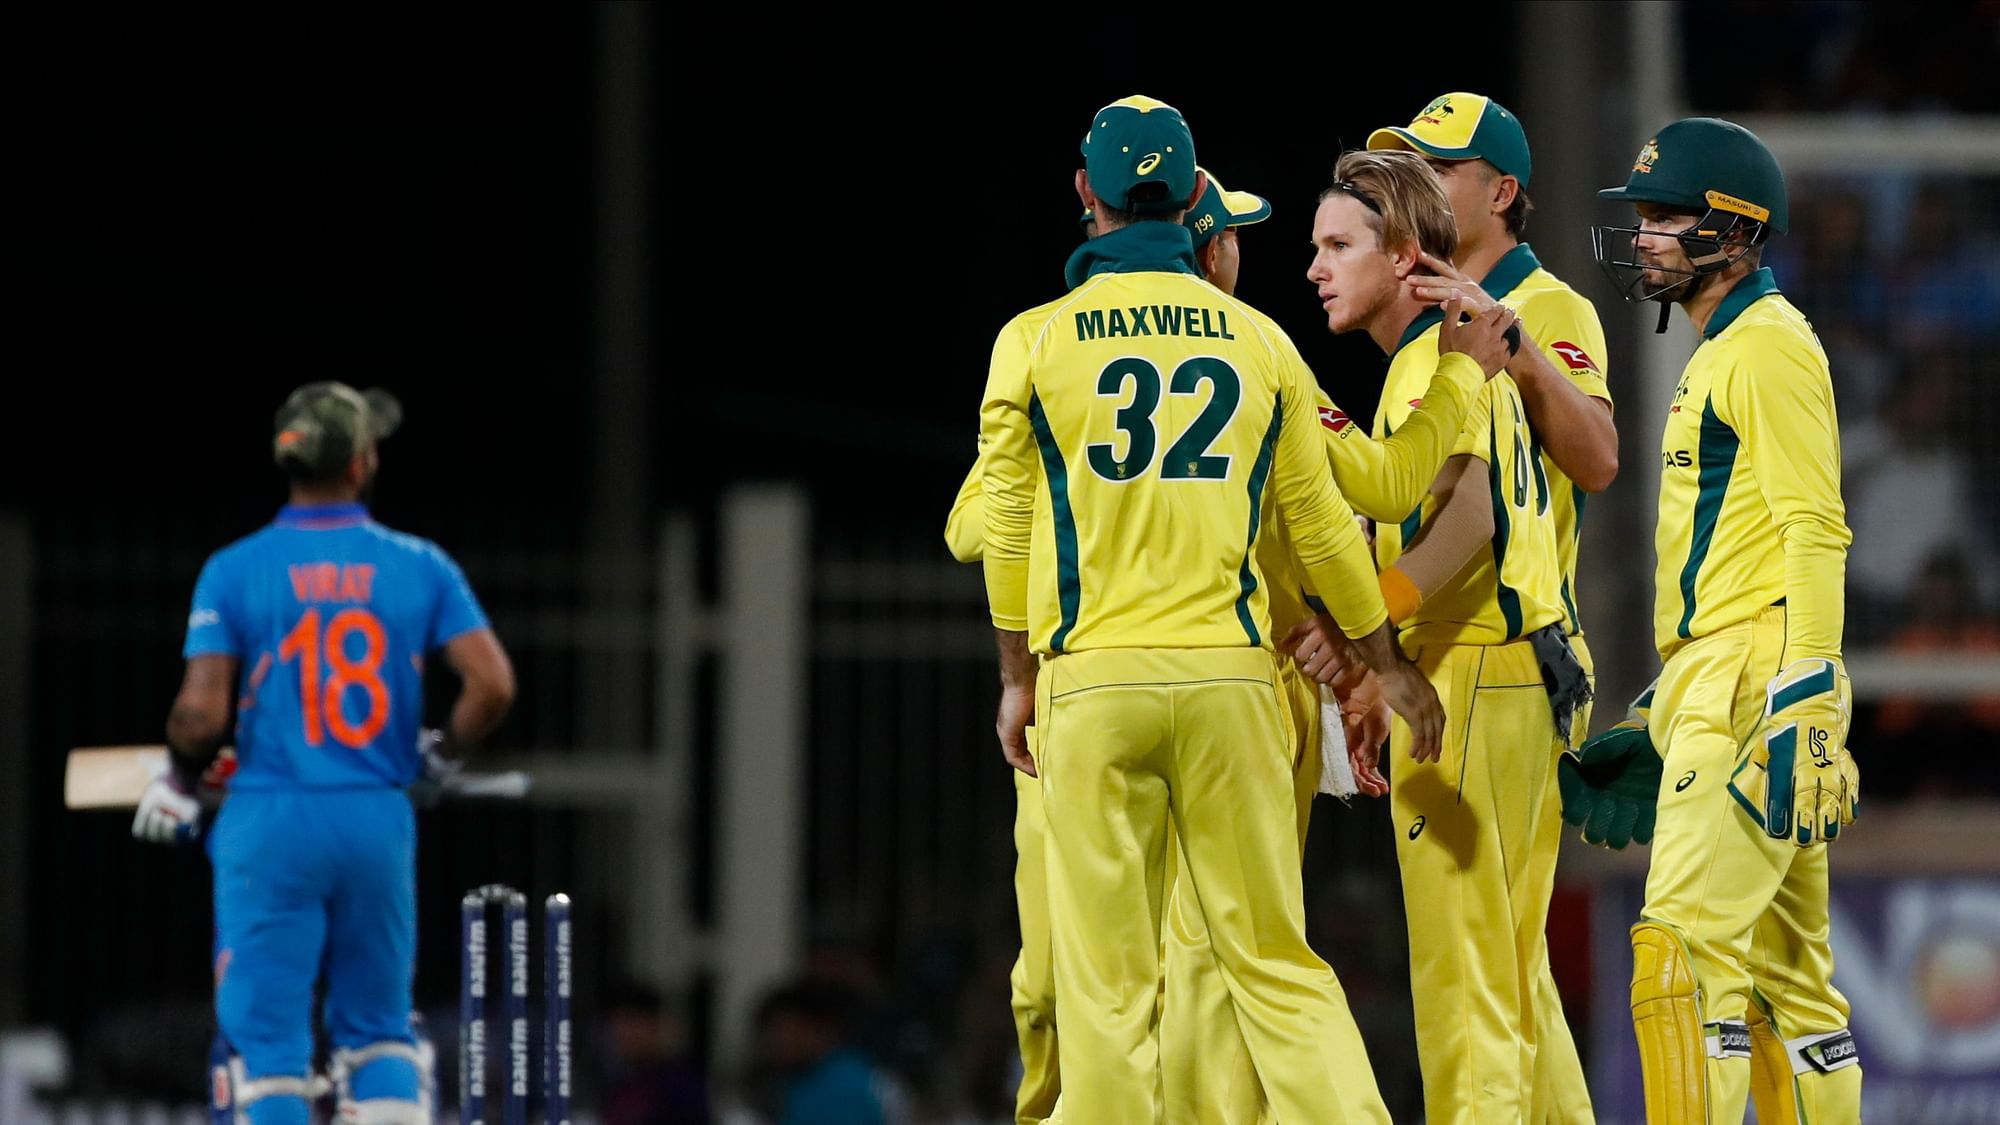 Australia defeated India by 32 runs in the third ODI at Ranchi.